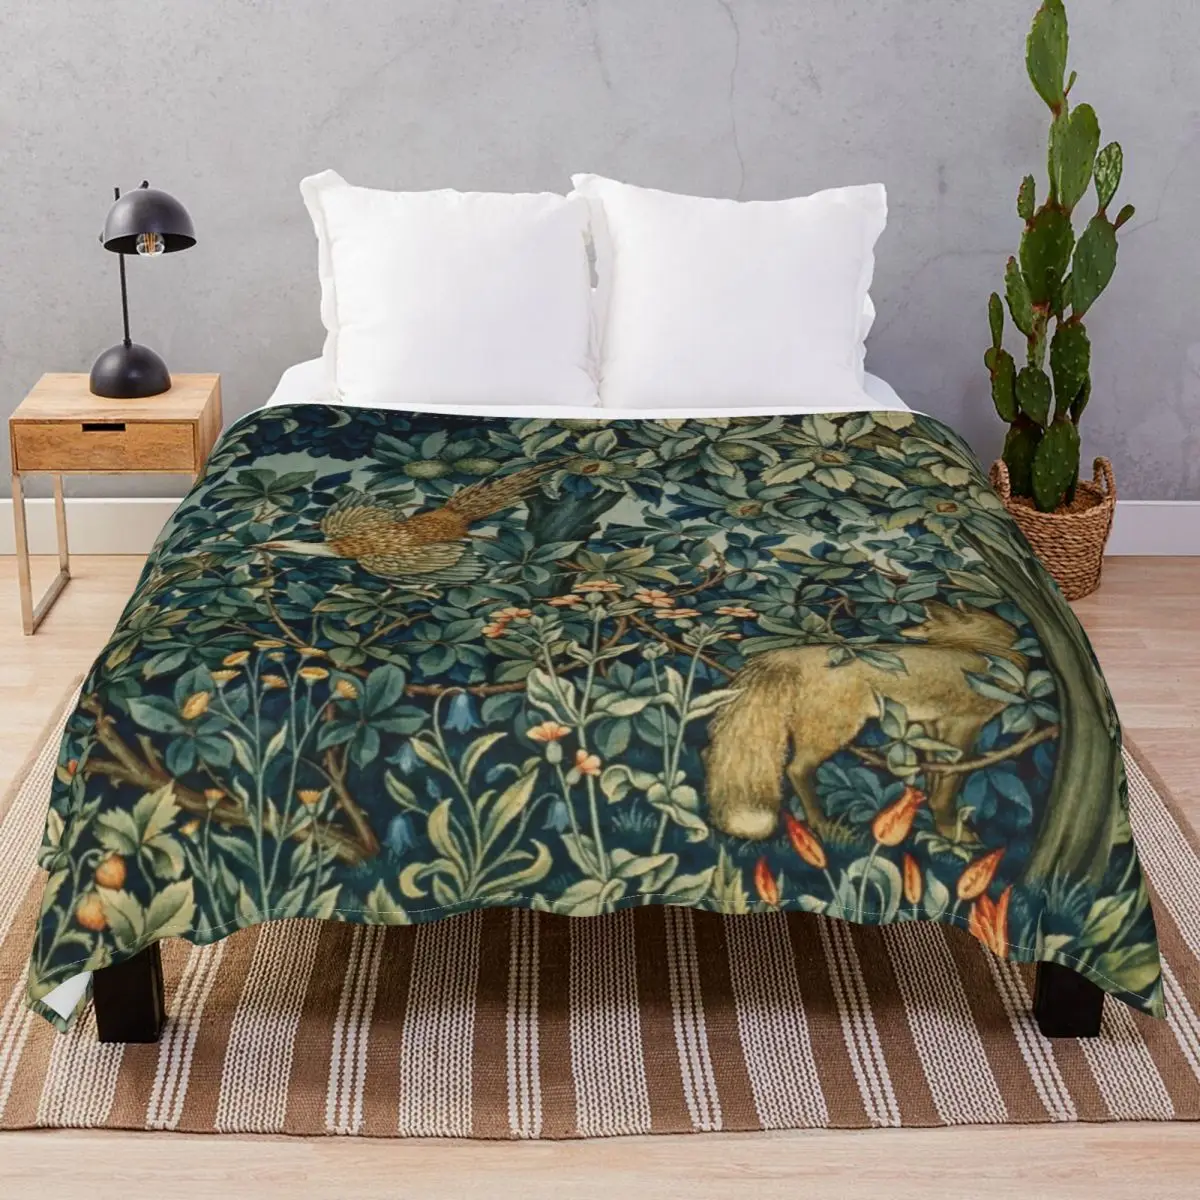 Pheasant And Fox Forest Blanket Flannel Printed Lightweight Thin Throw Blankets for Bedding Sofa Camp Office